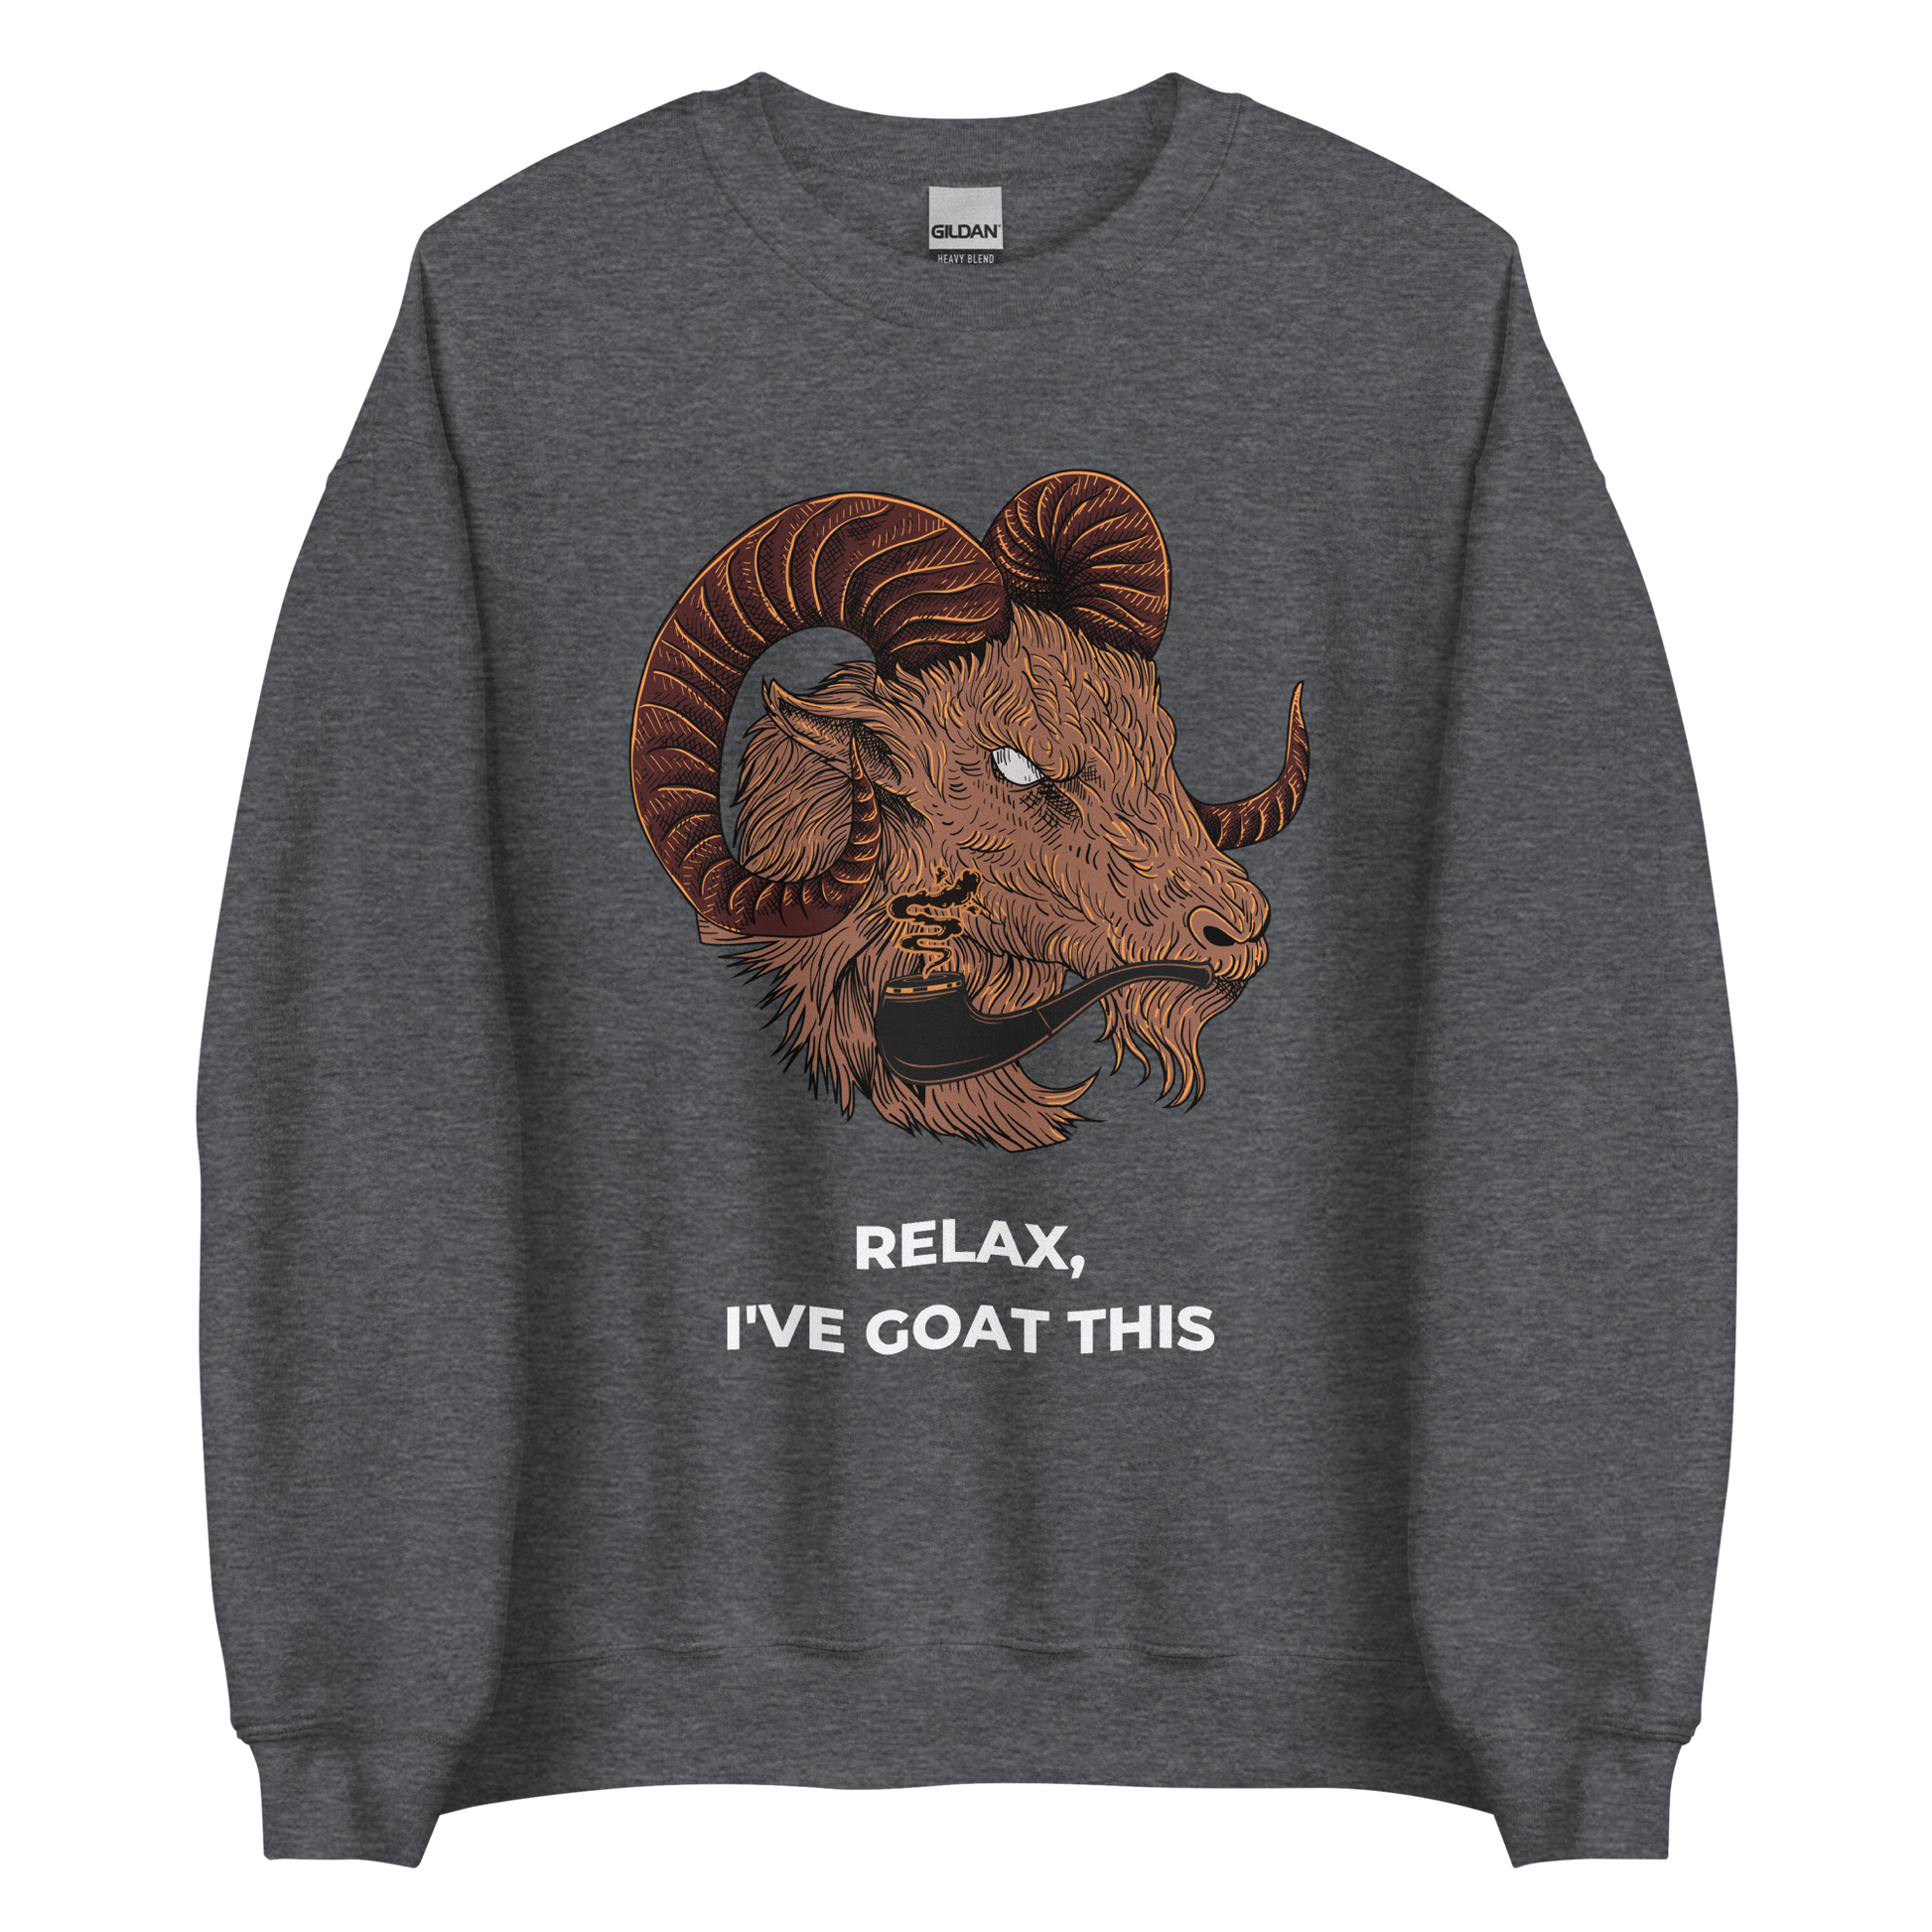 Dark Heather Goat Sweatshirt featuring a fierce Relax I've Goat This graphic on the chest - Funny Graphic Goat Sweatshirts - Boozy Fox